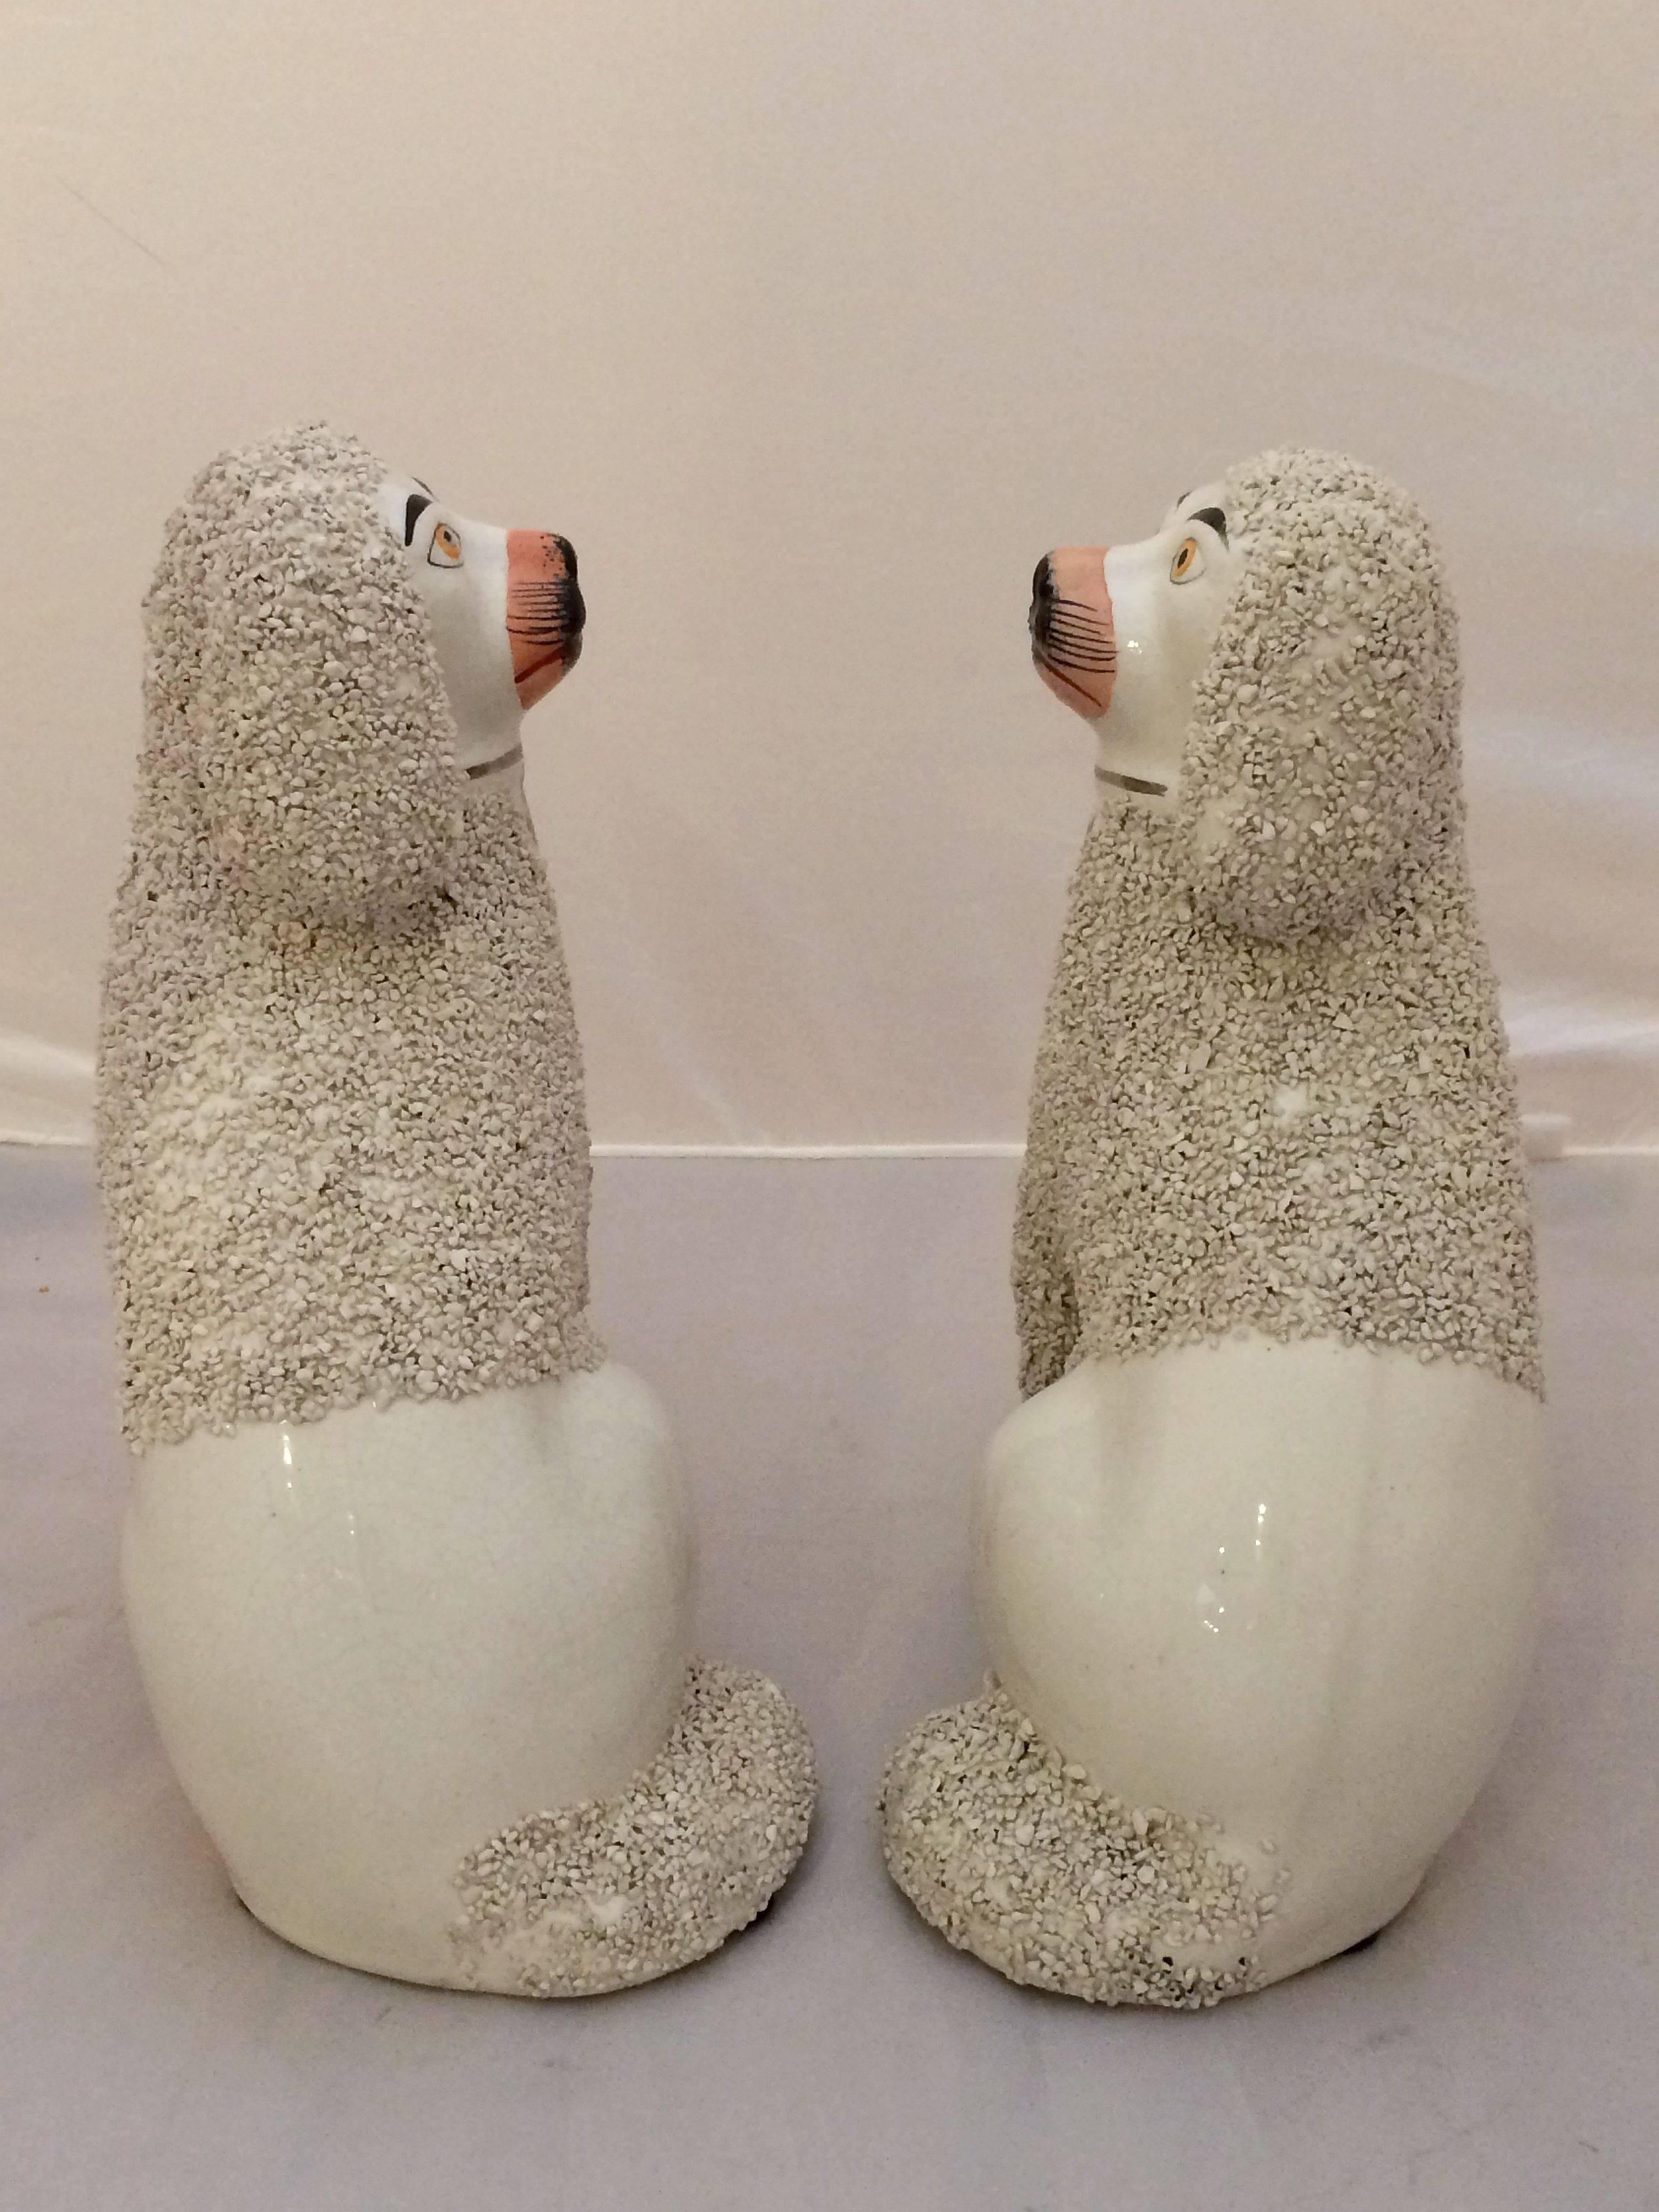 Glazed Pair of Large 19th Century Staffordshire Poodles from England